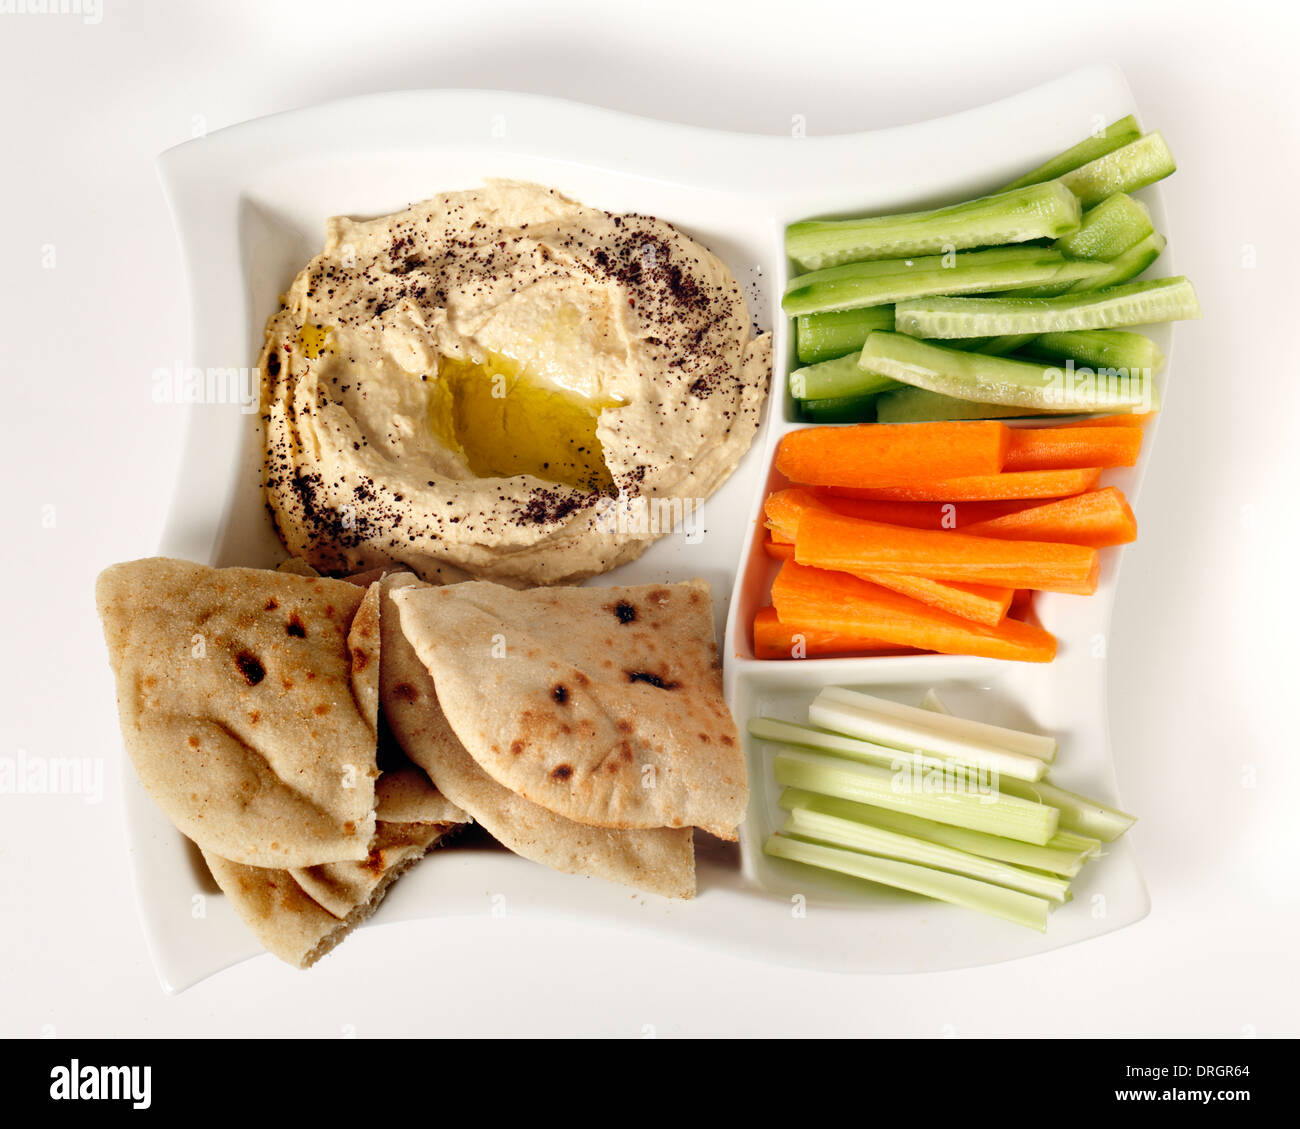 Top view of a dip tray with hummus, bread, carrot sticks, celery and cucumber. Stock Photo